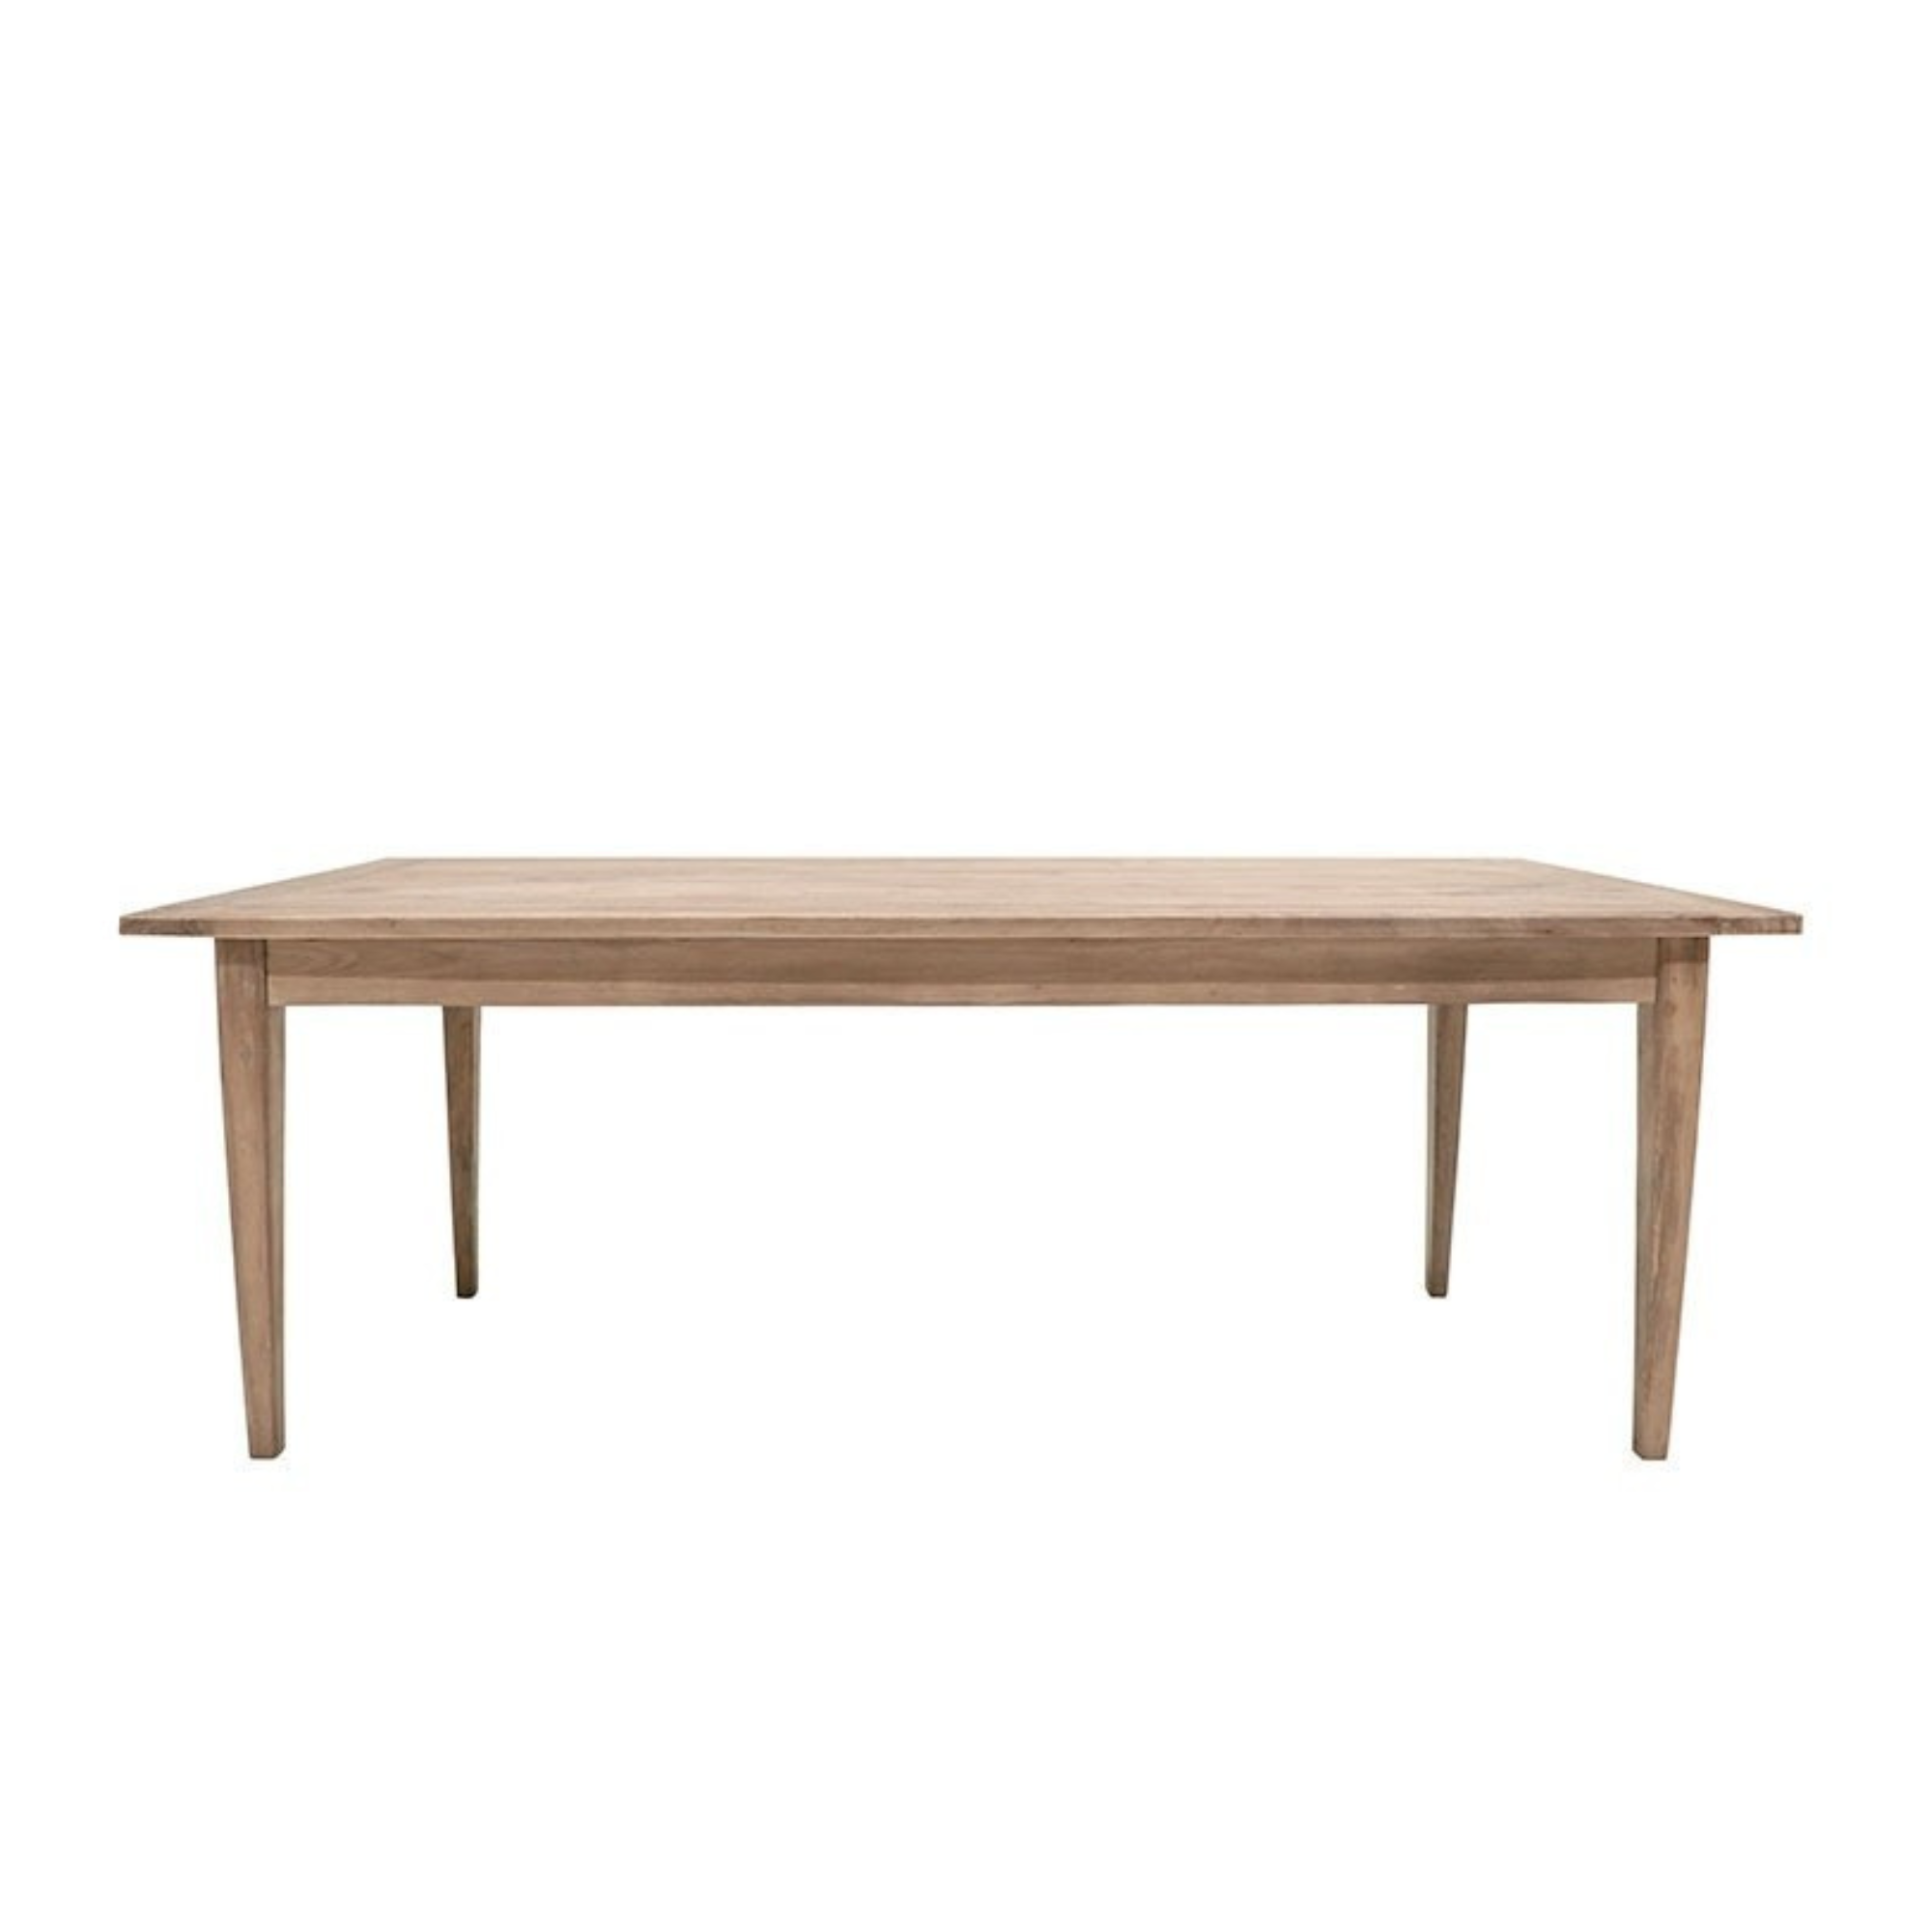 BASQUE ELM DINING TABLE | 3 SIZES